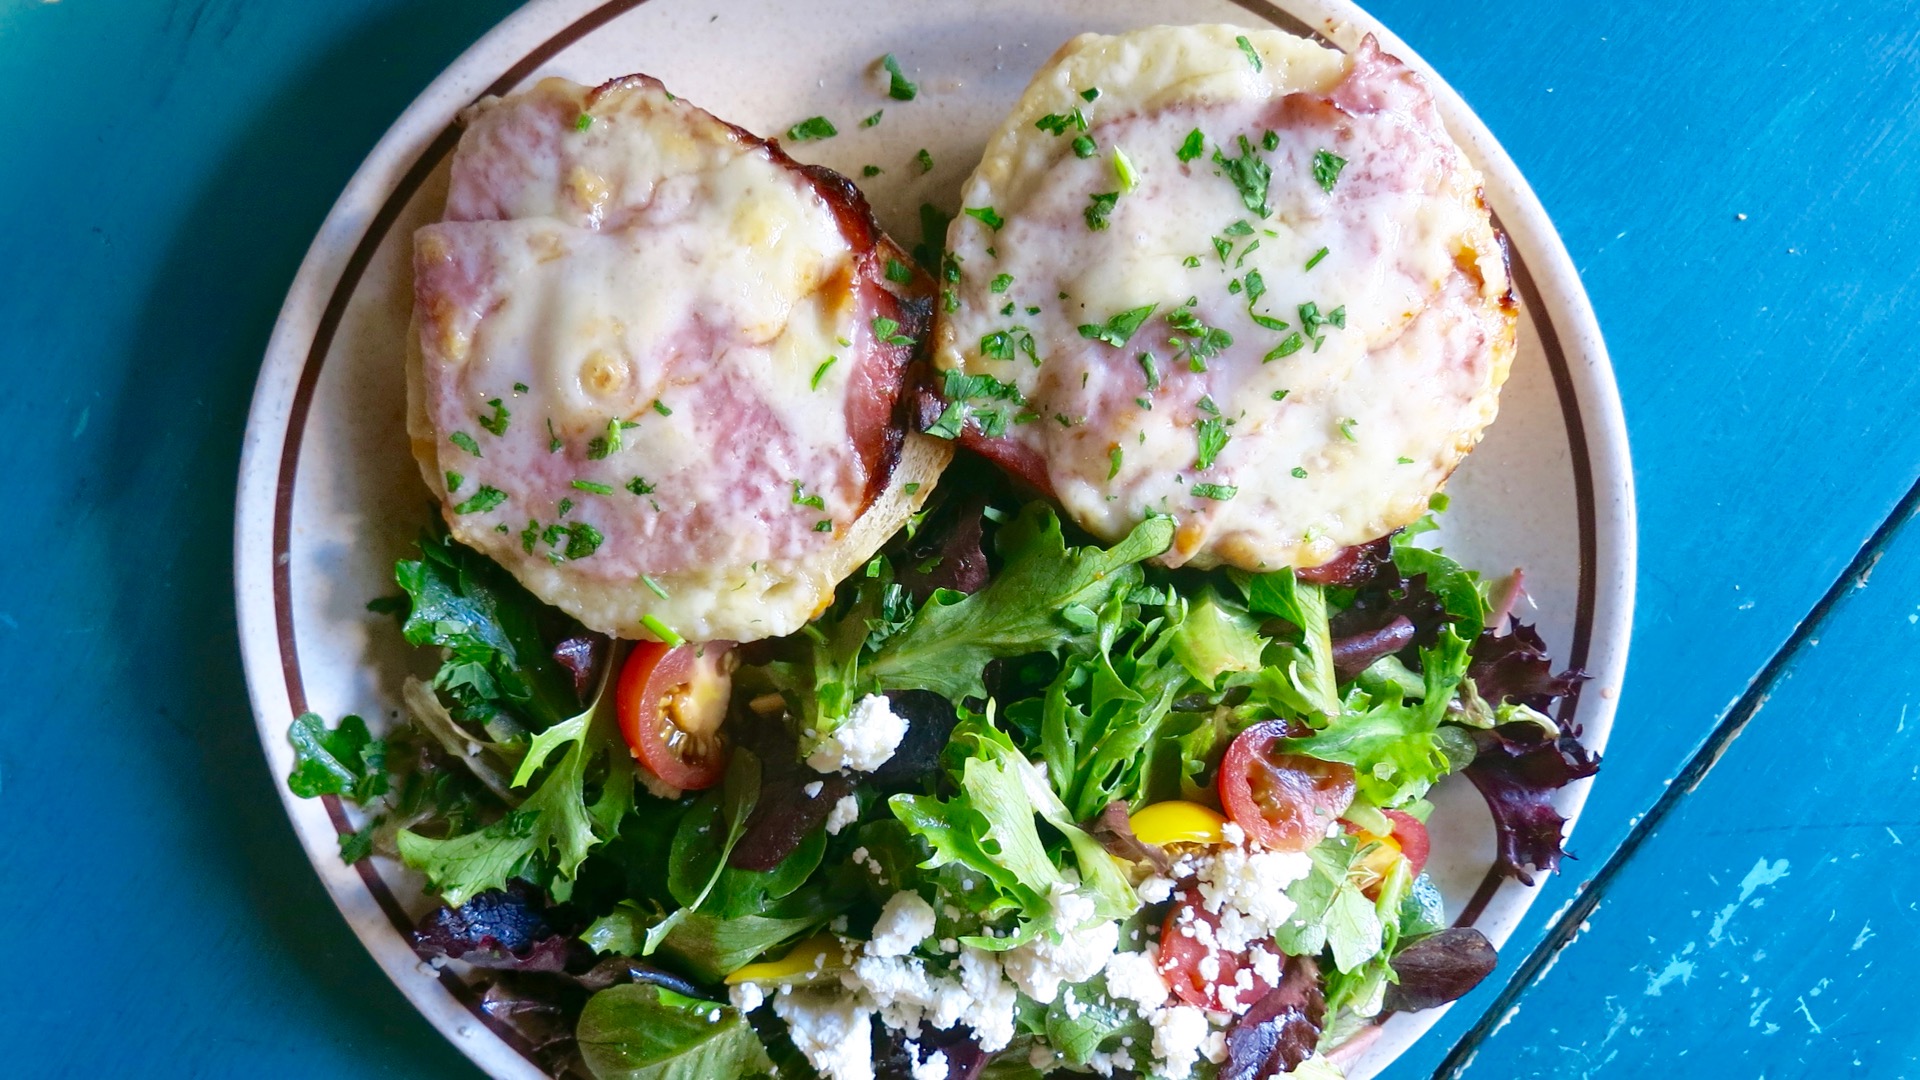 A perfect pairing for lunch: ham and cheese melt with a fresh side salad.